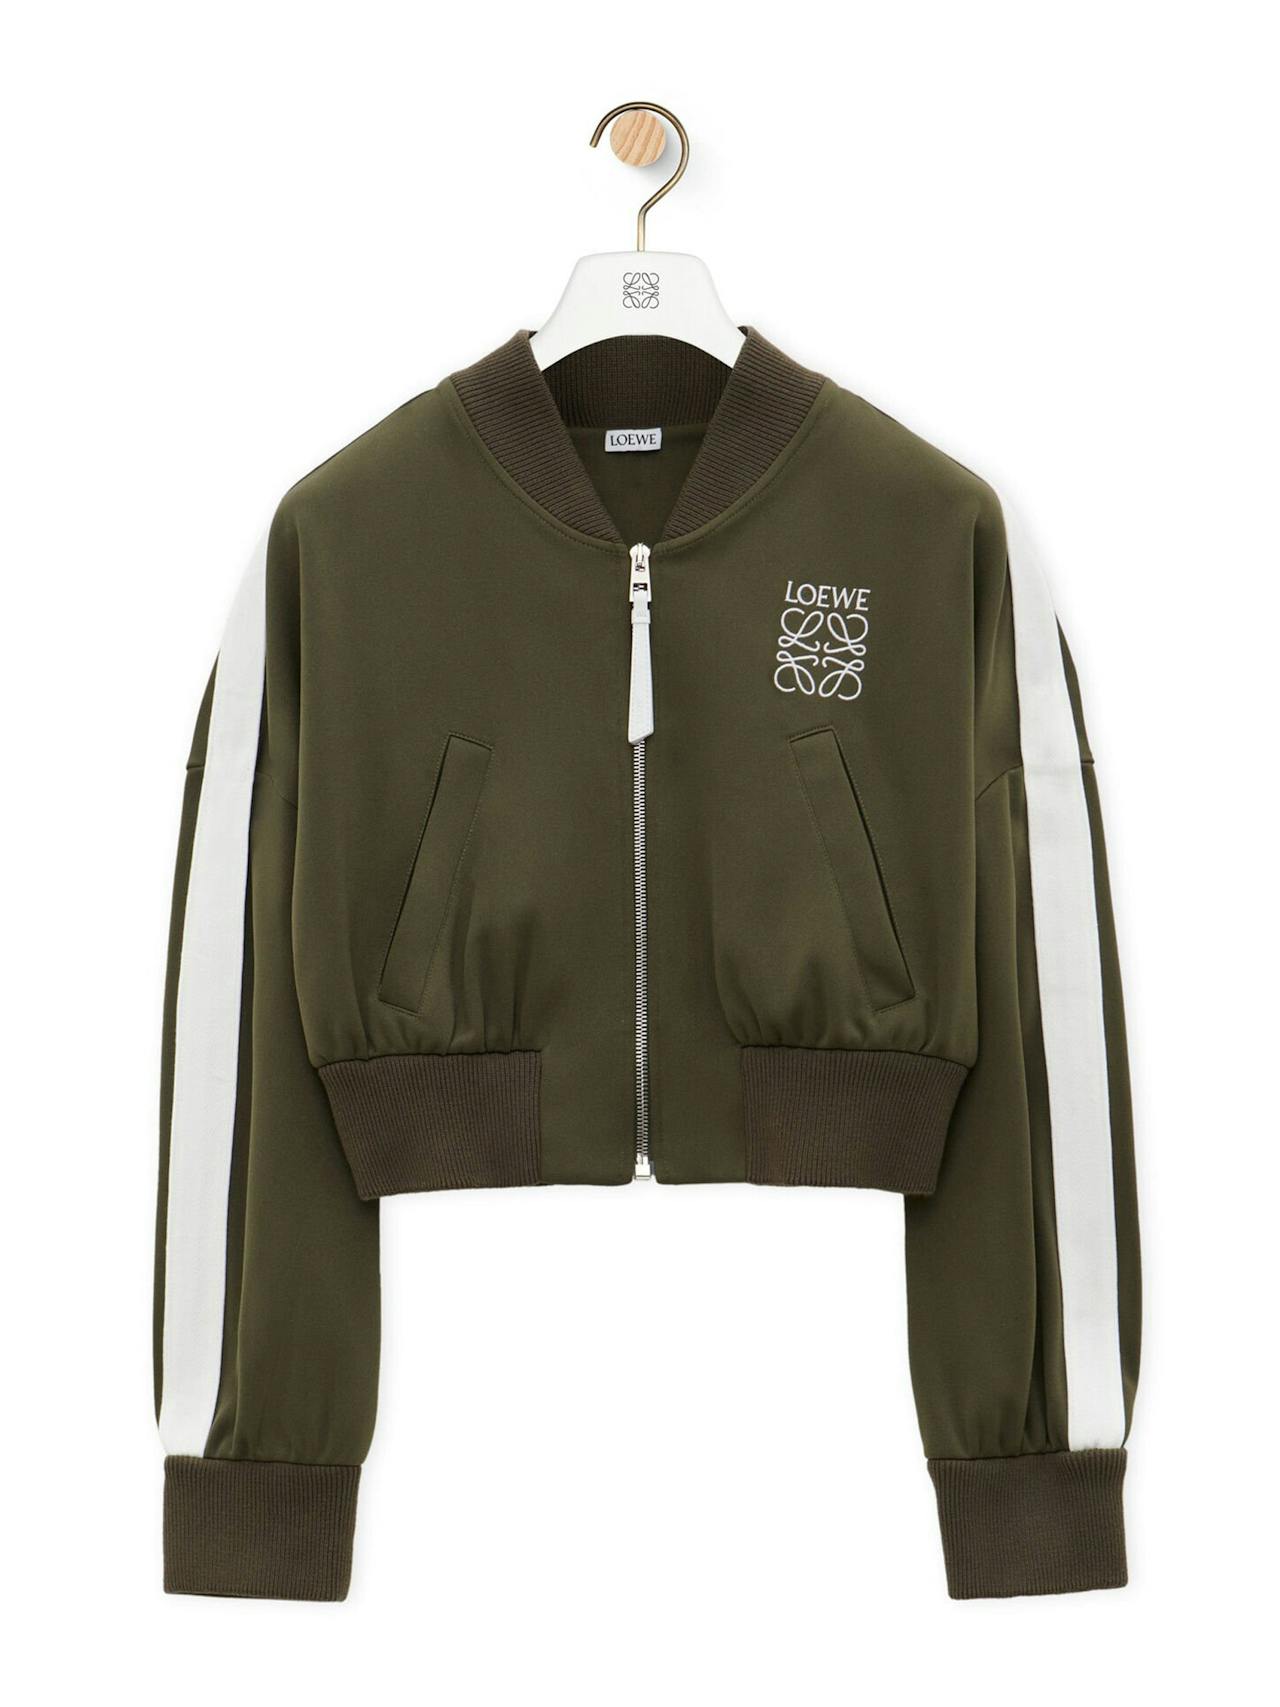 Bomber jacket in technical jersey